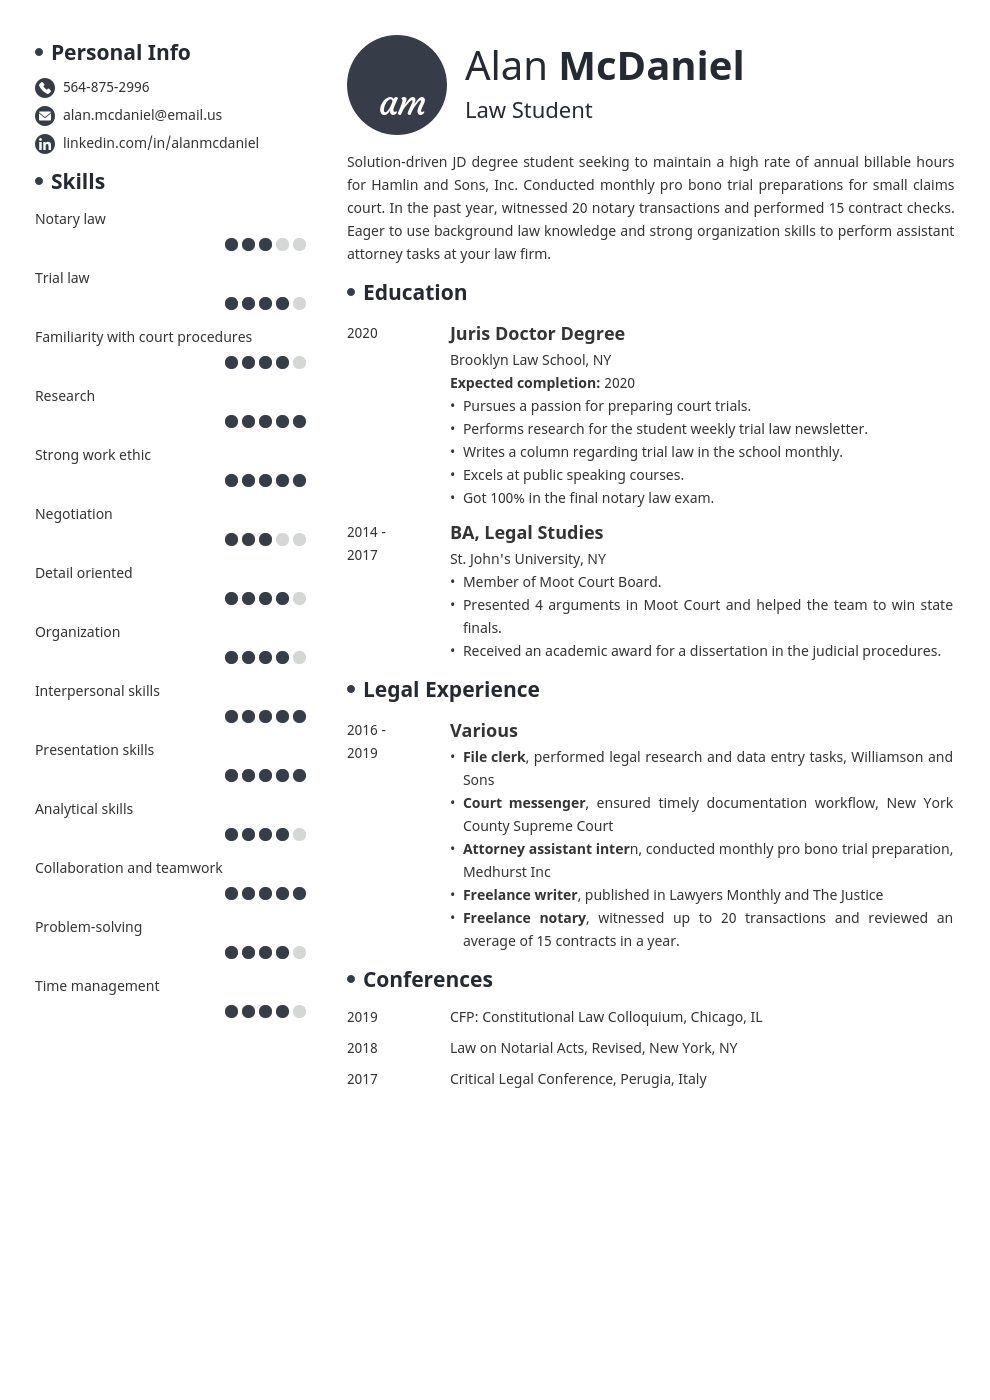 Buy resume for writing law school applications